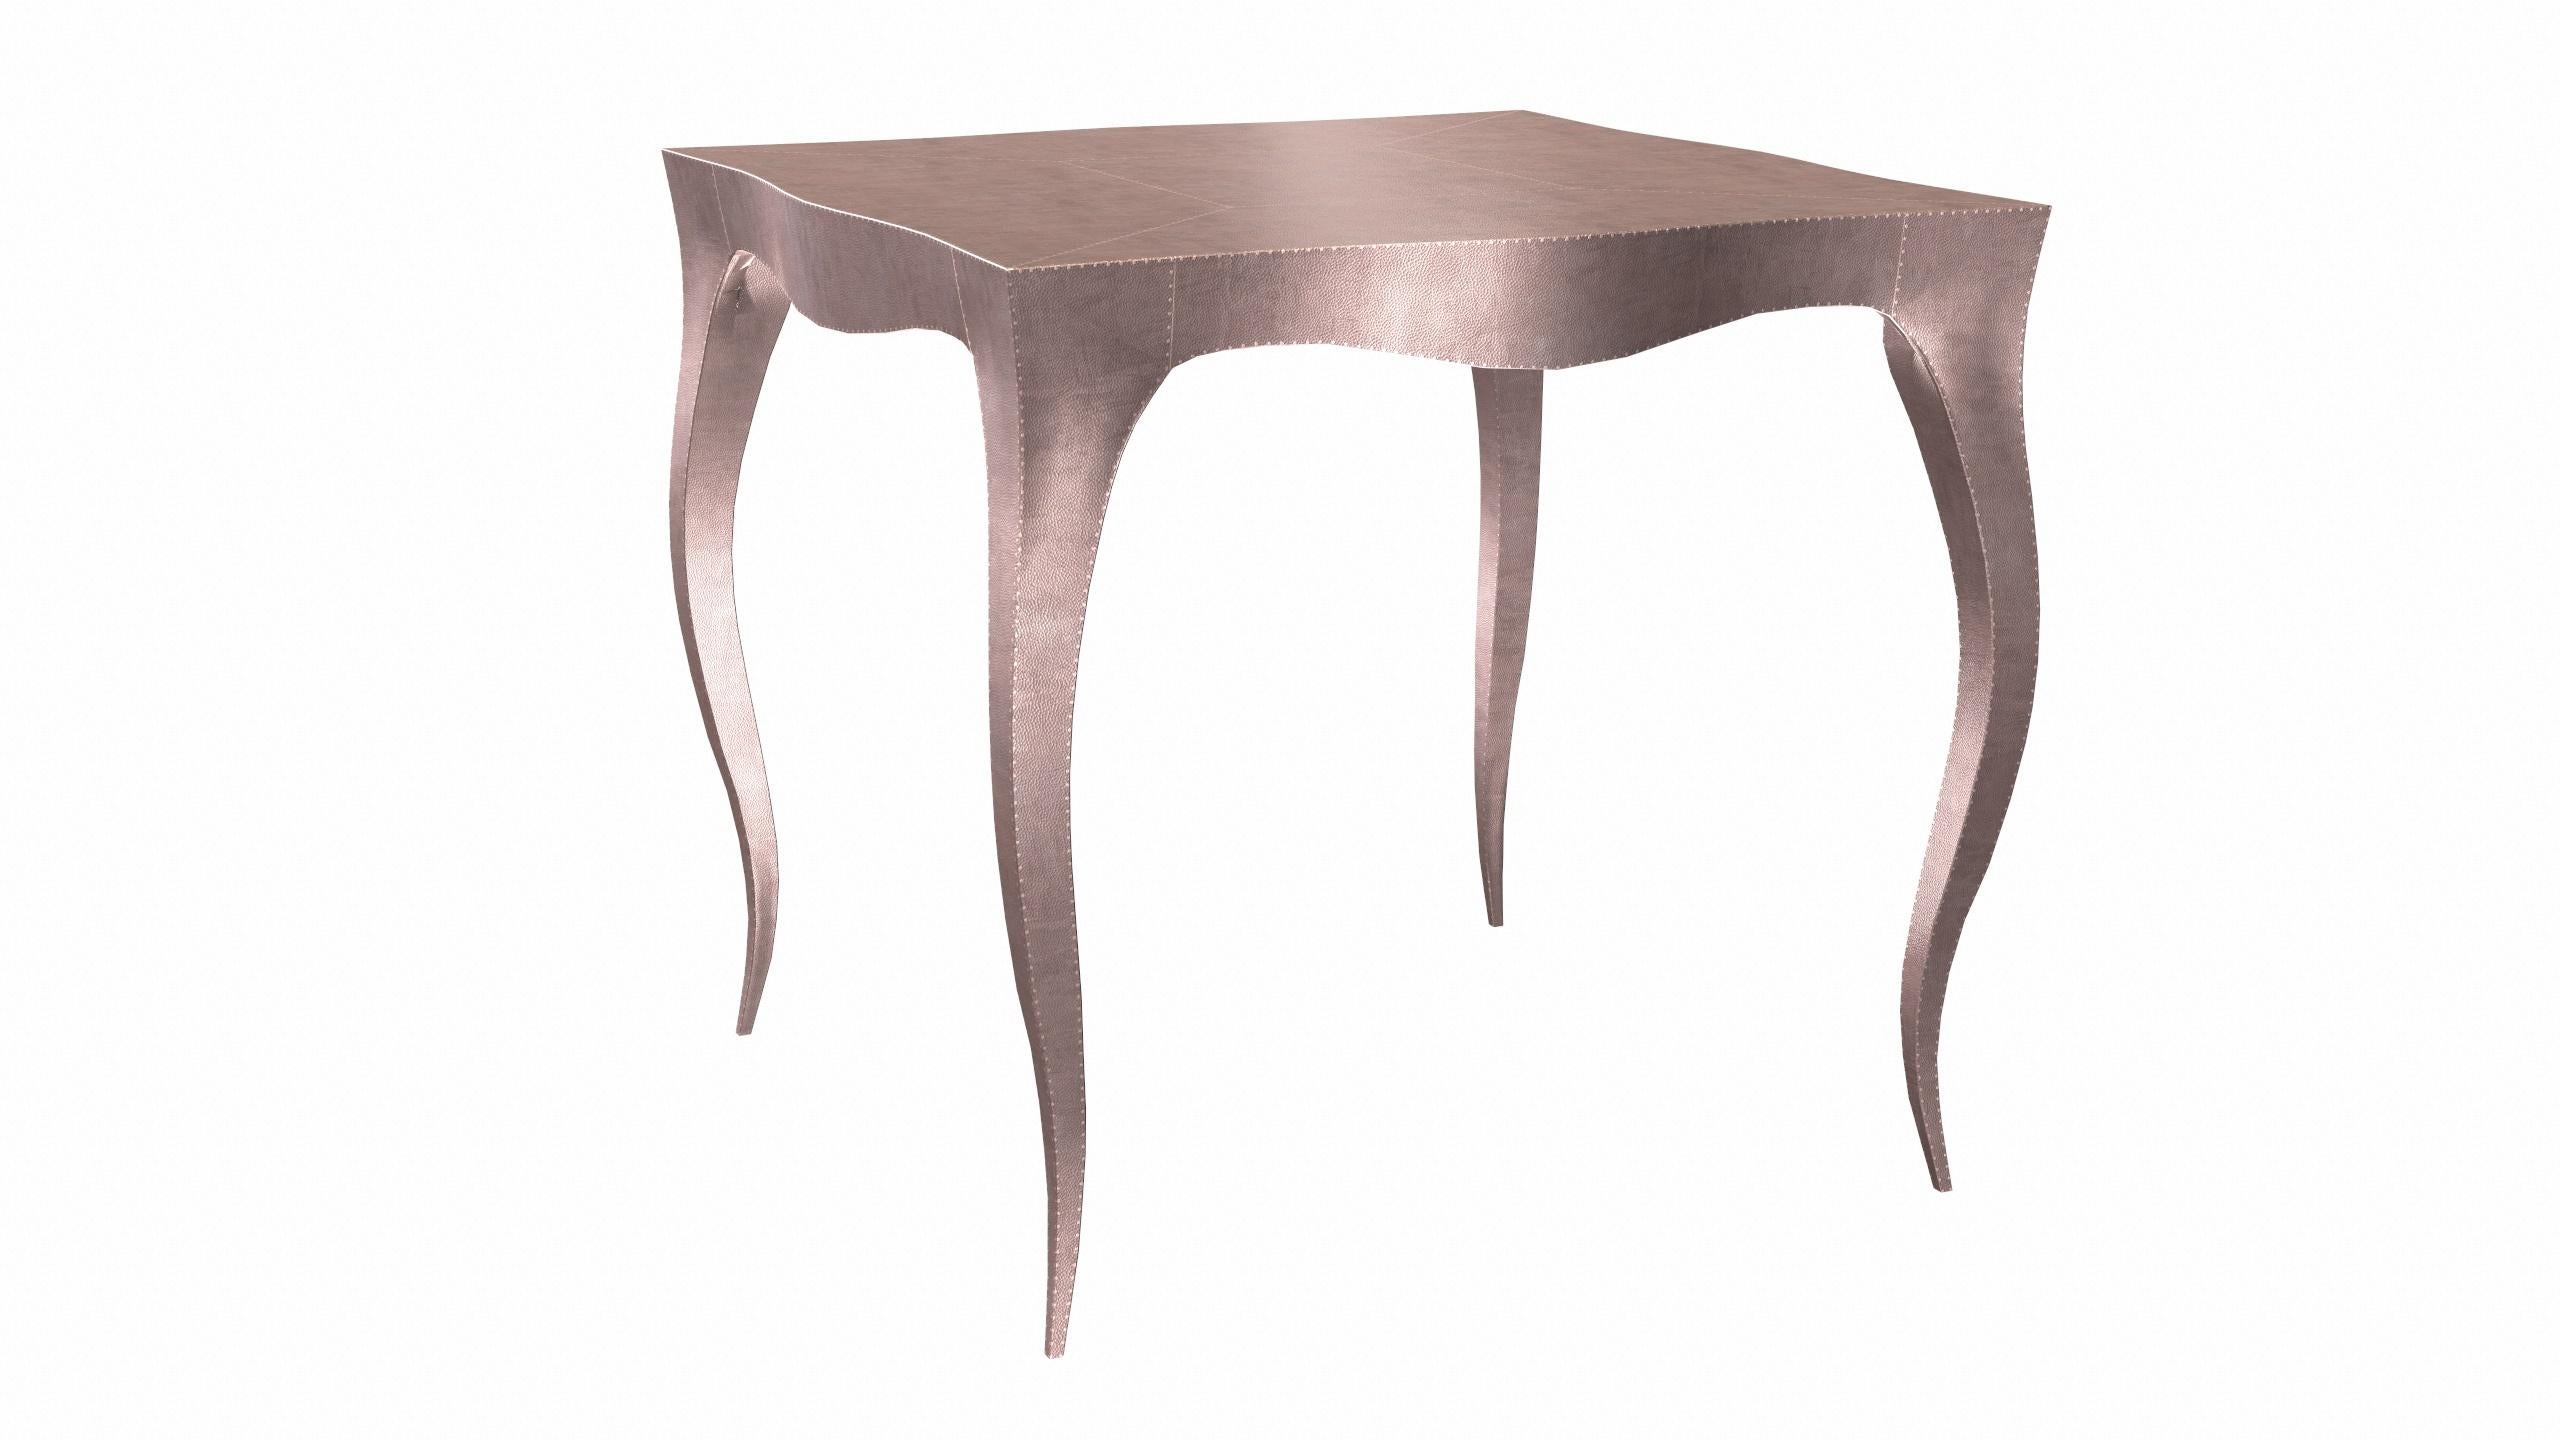 Hand-Carved Louise Art Deco Game Tables Mid. Hammered Copper by Paul Mathieu For S. Odegard For Sale